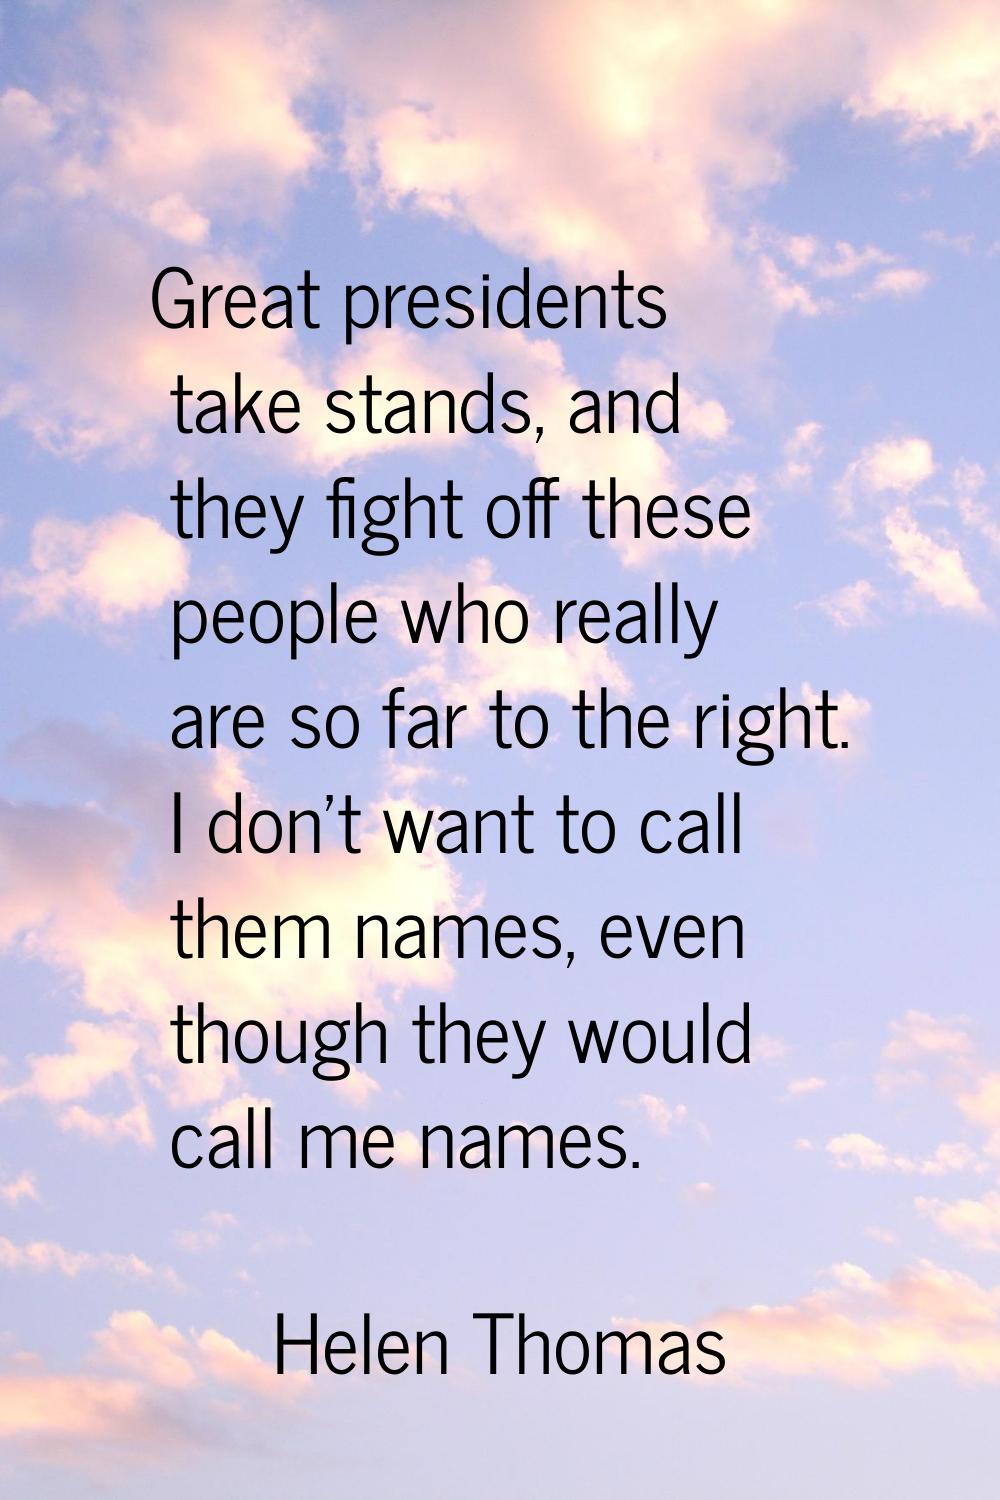 Great presidents take stands, and they fight off these people who really are so far to the right. I